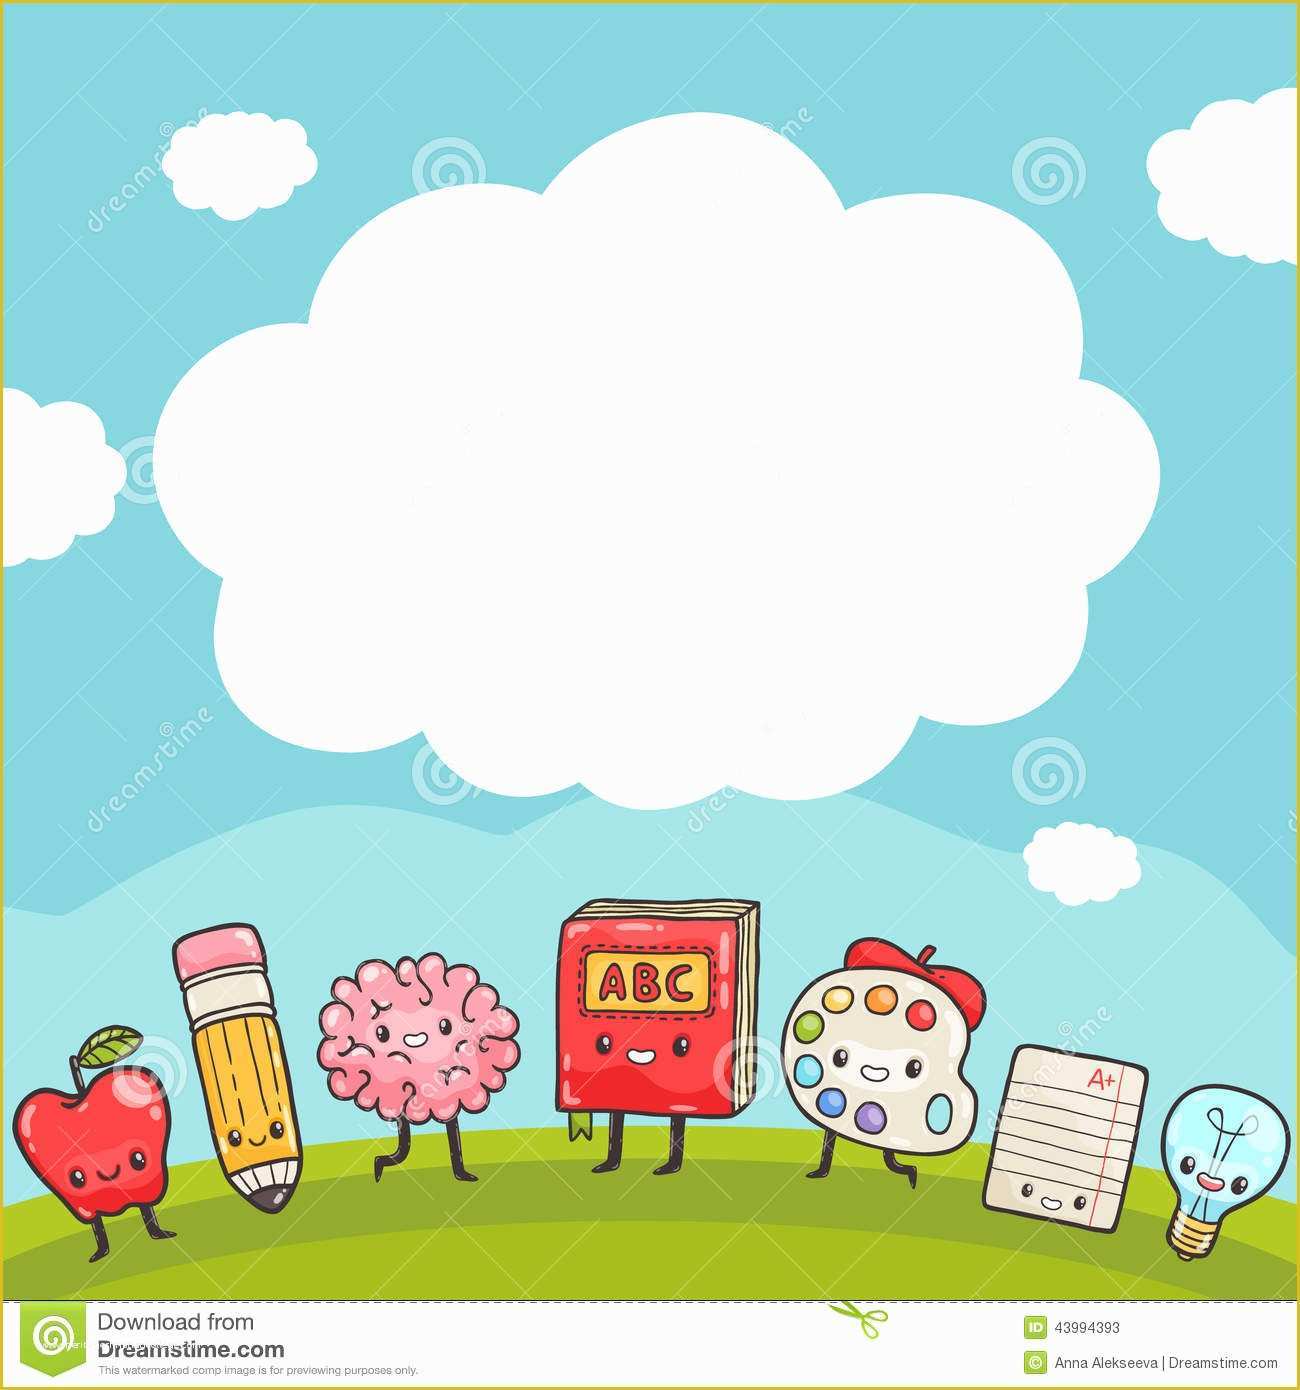 Free Cute Templates Of Cute Cartoon Characters Back to School Background Stock